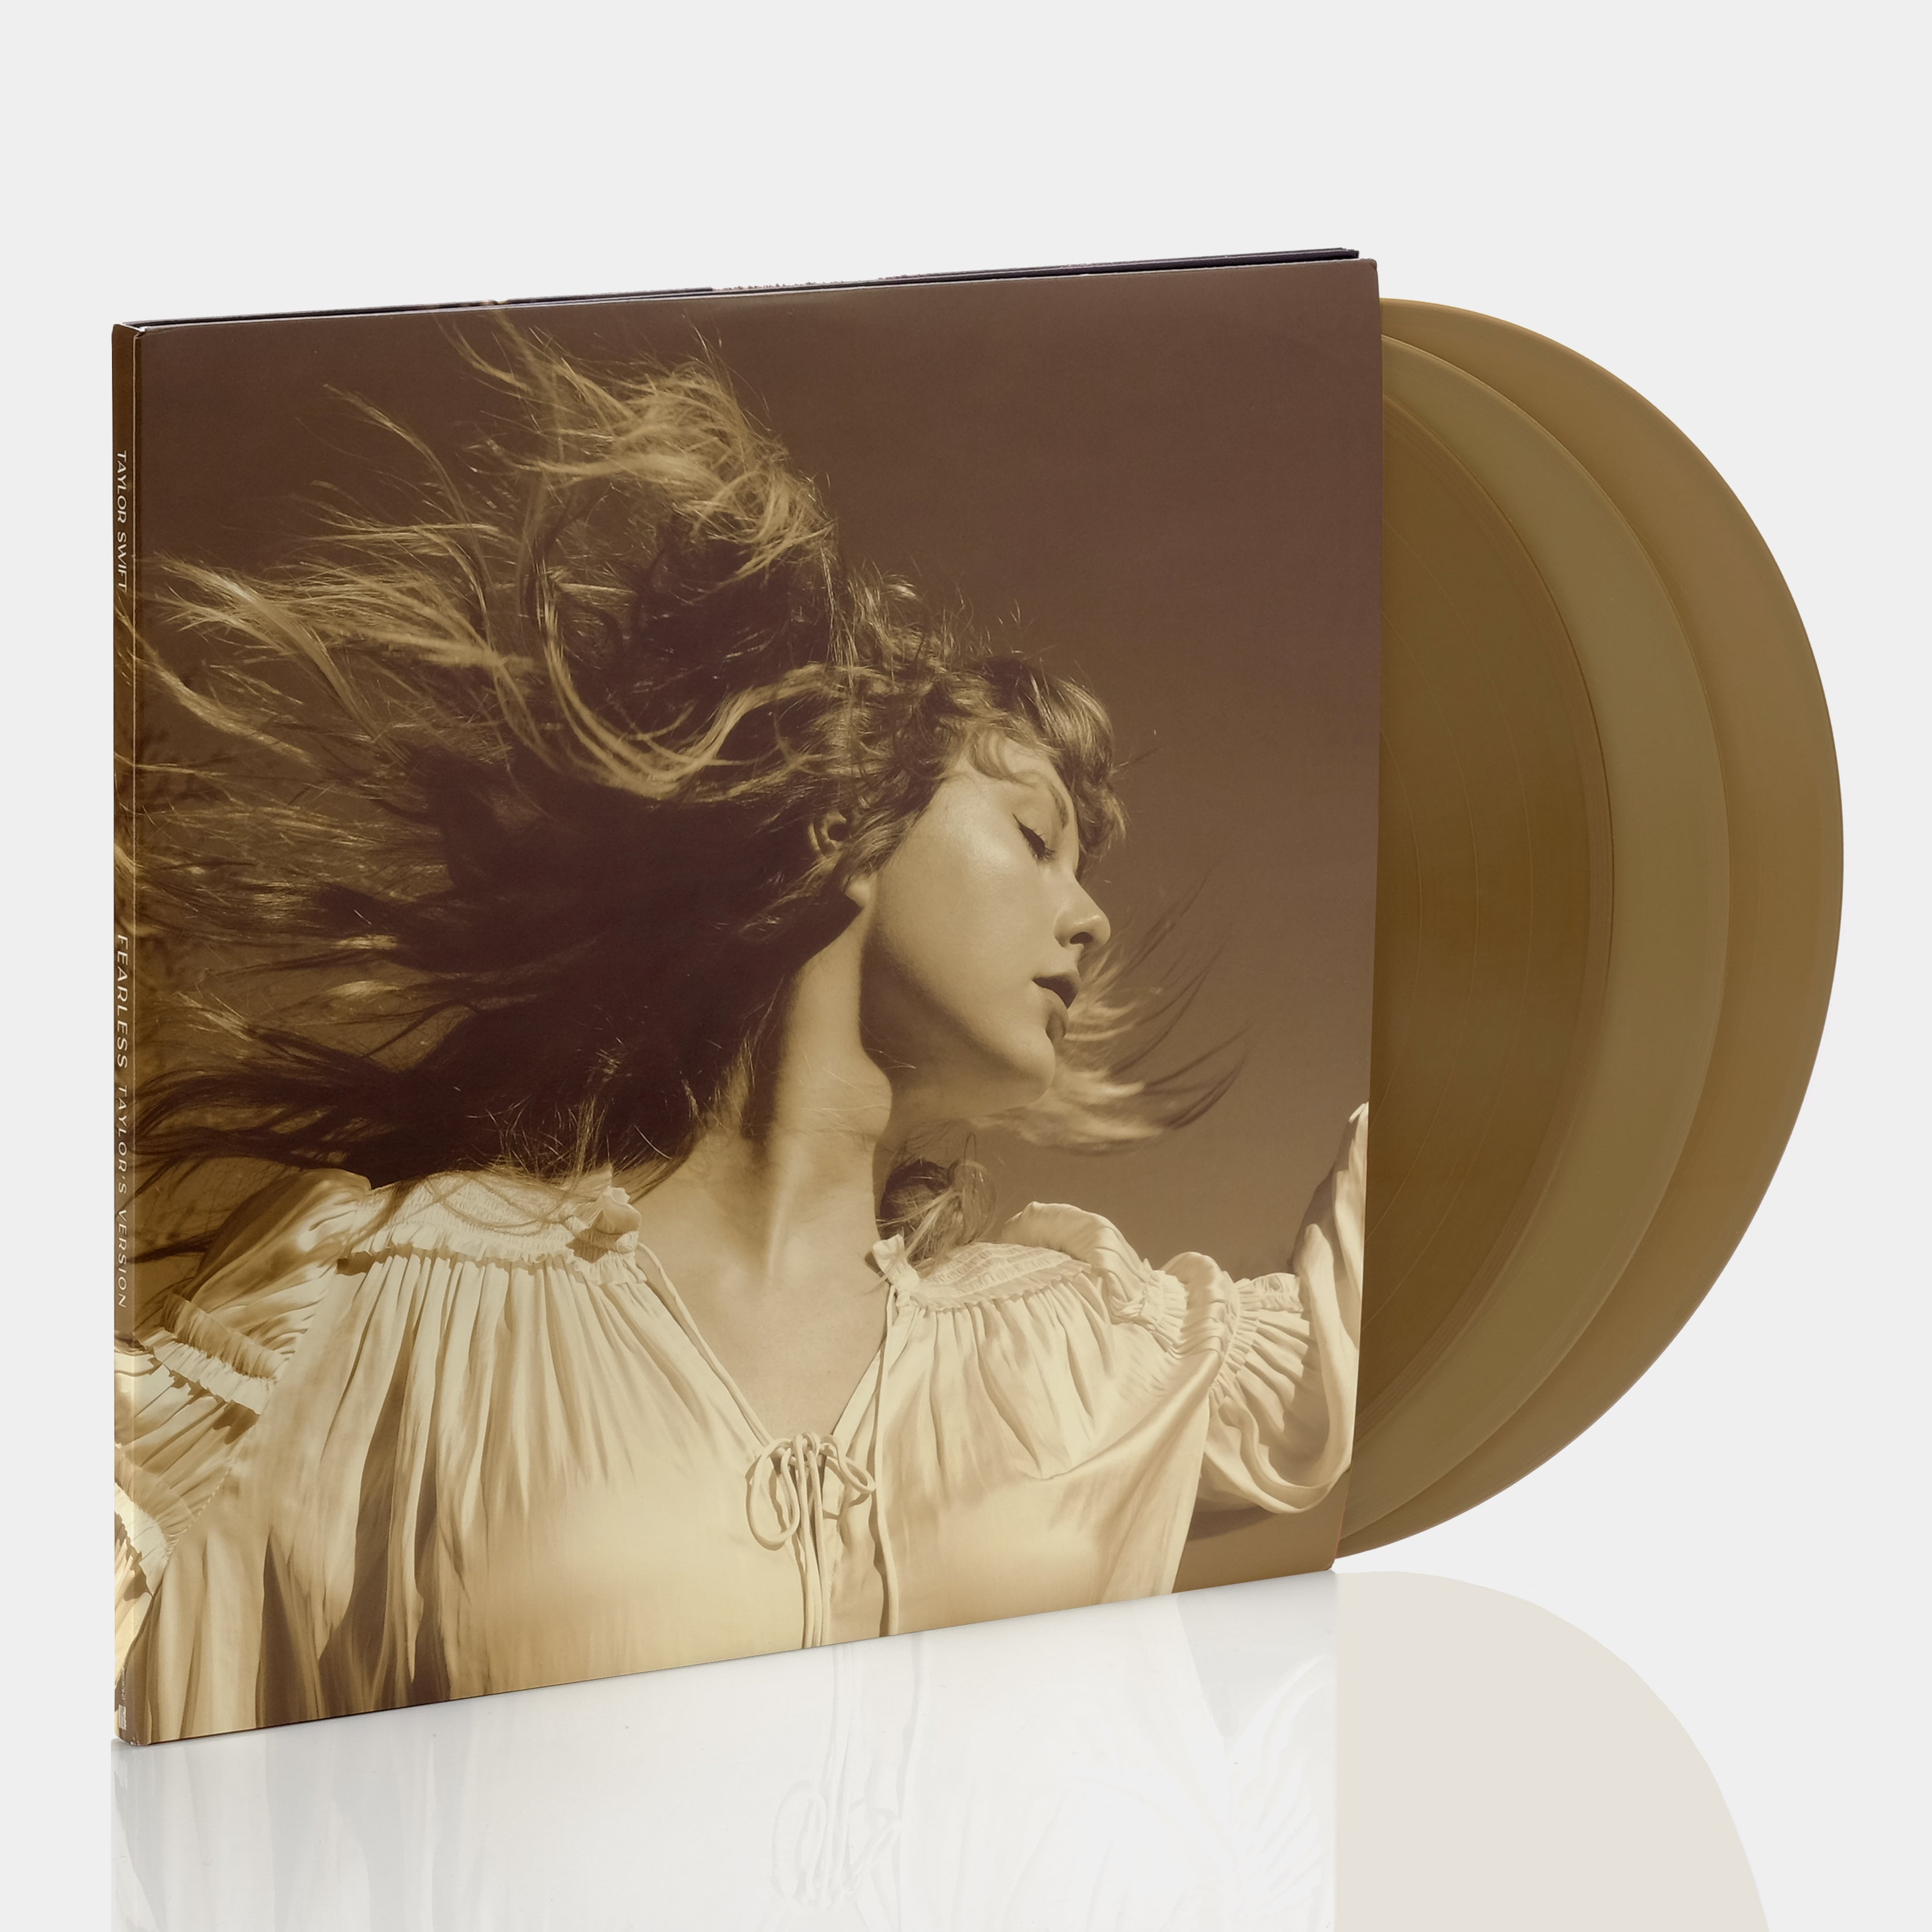 Taylor Swift - Fearless (Taylor's Version) 3xLP Gold Vinyl Record